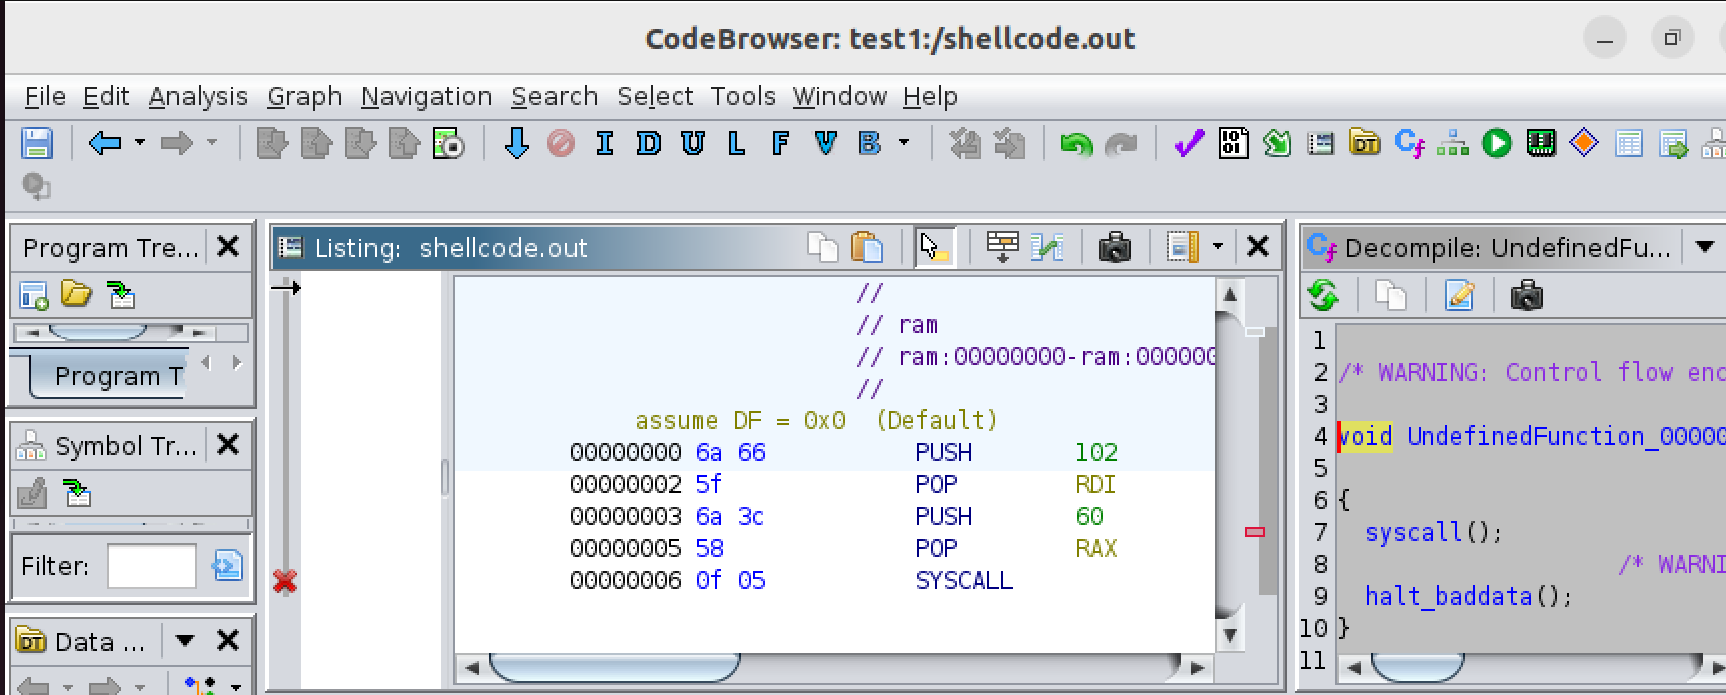 Figure 2 - Decompiled view of the shellcode